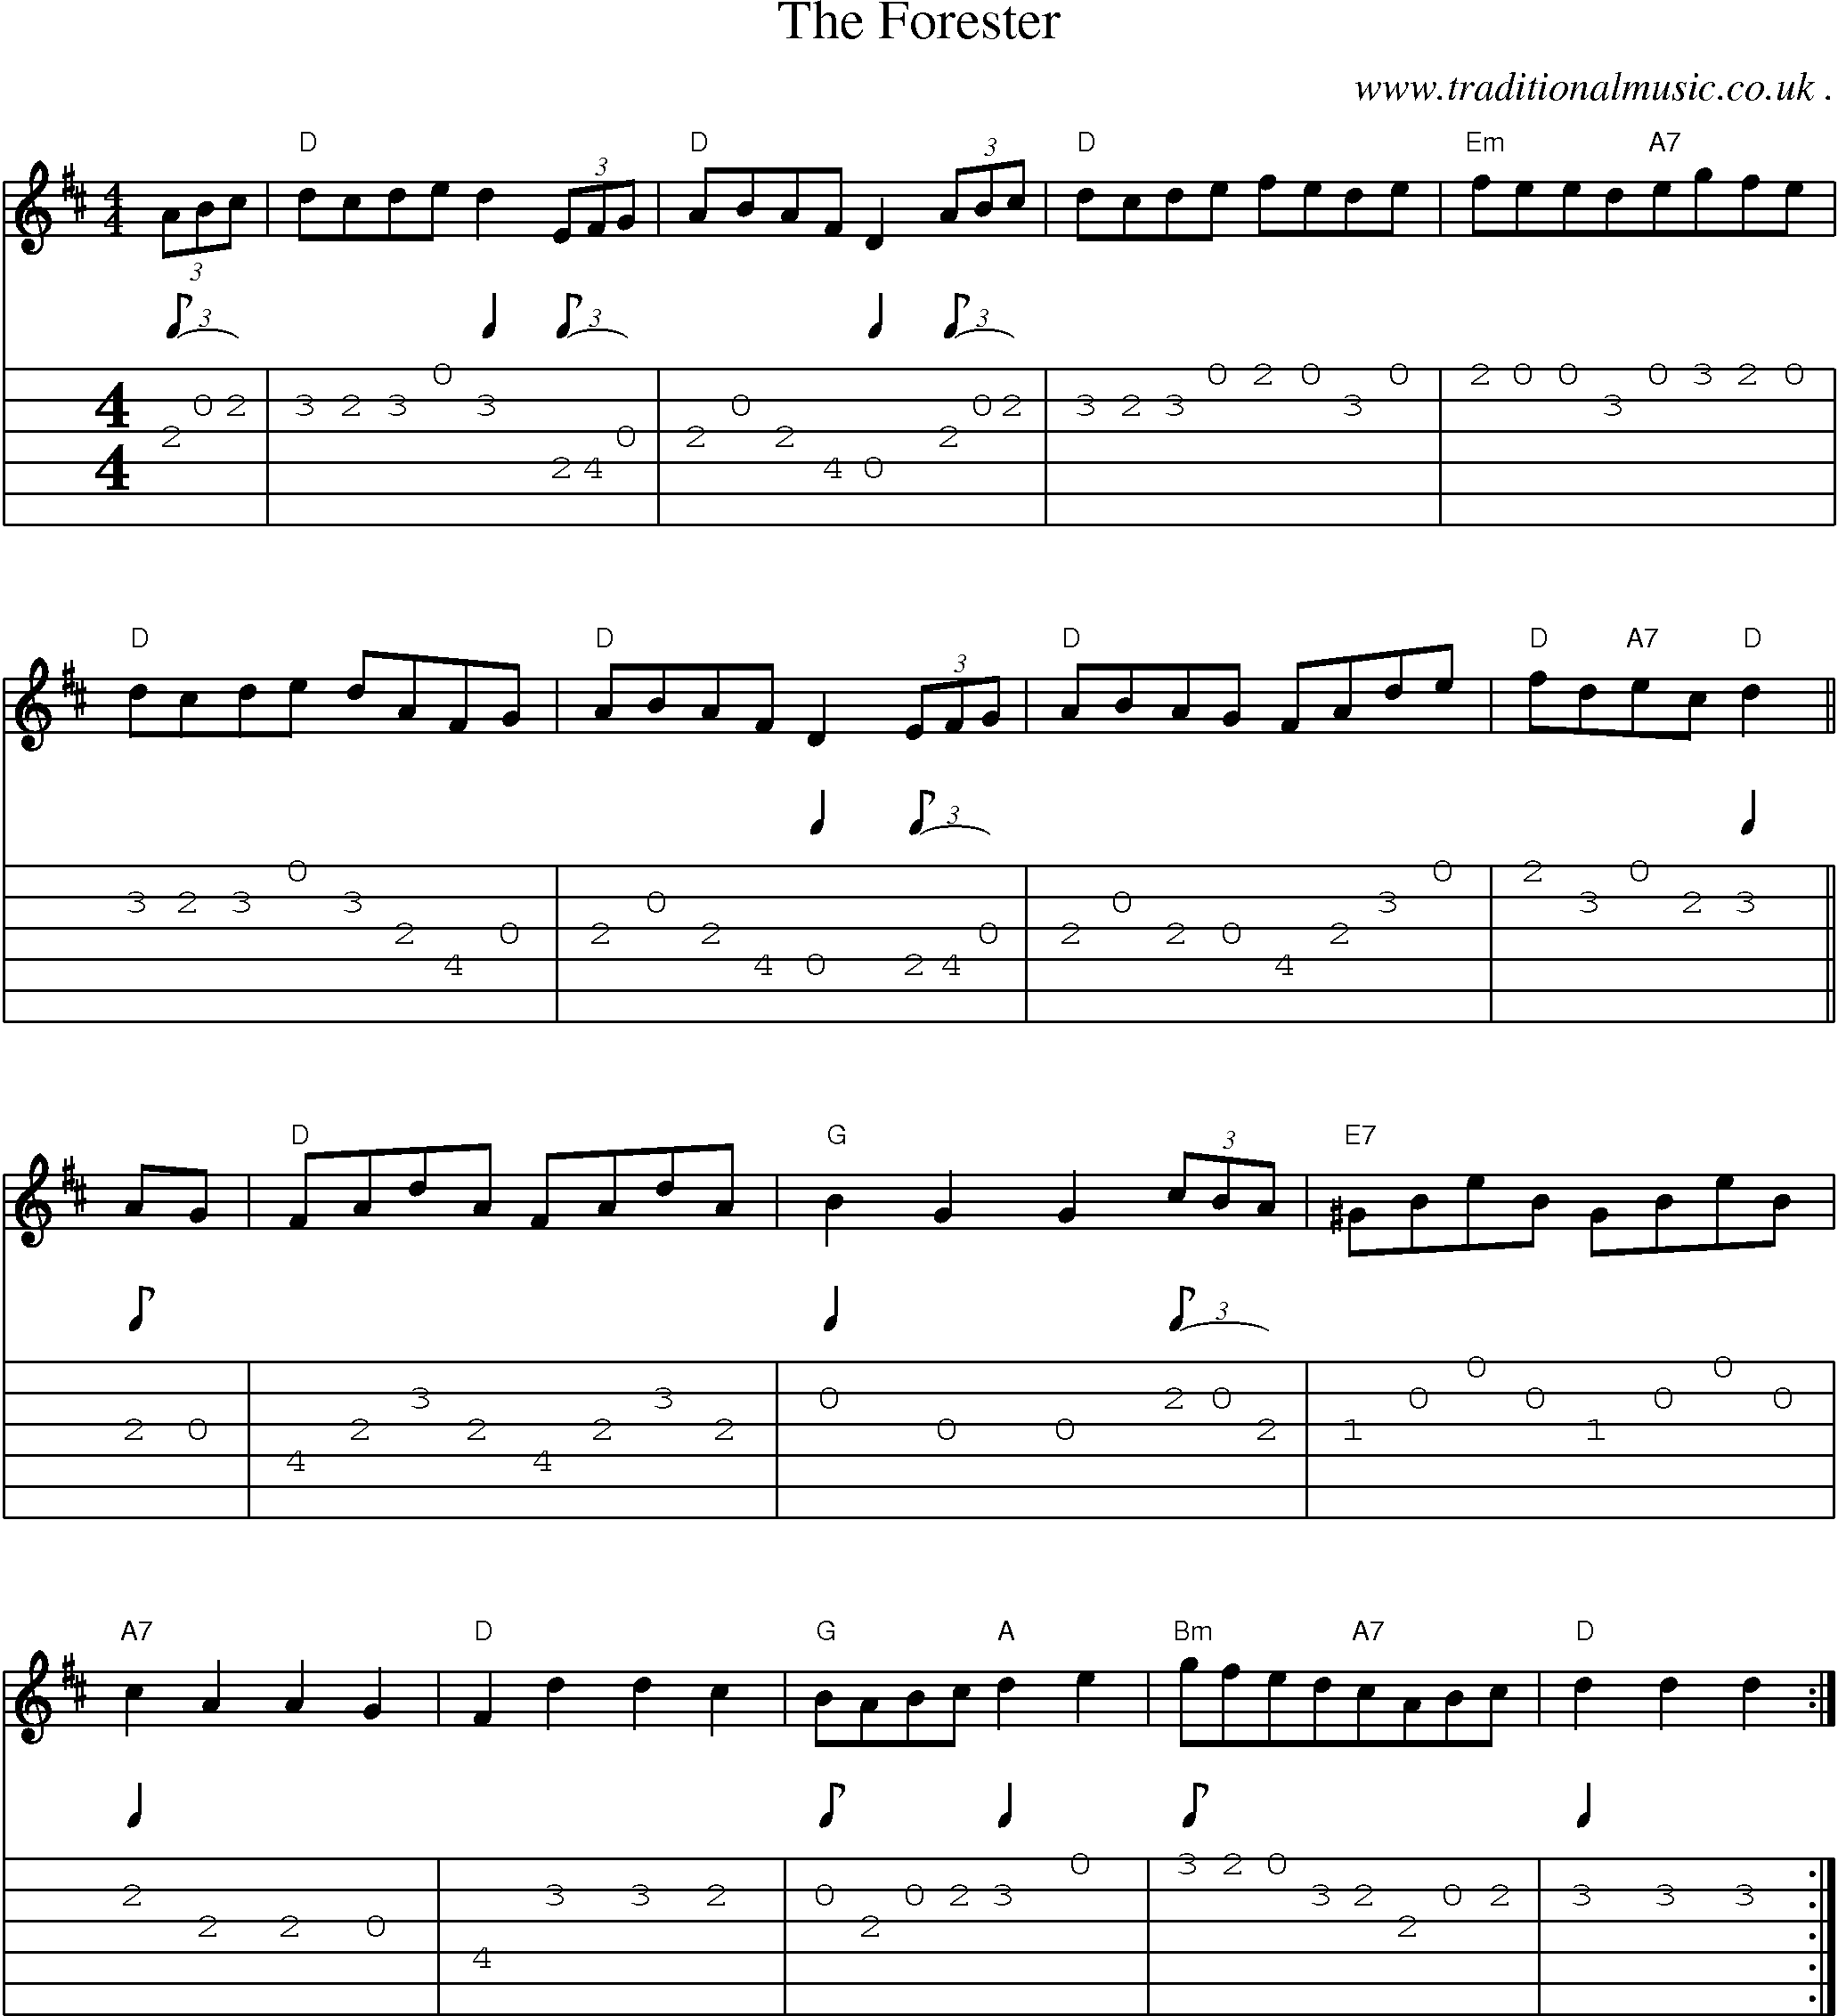 Sheet-Music and Guitar Tabs for The Forester